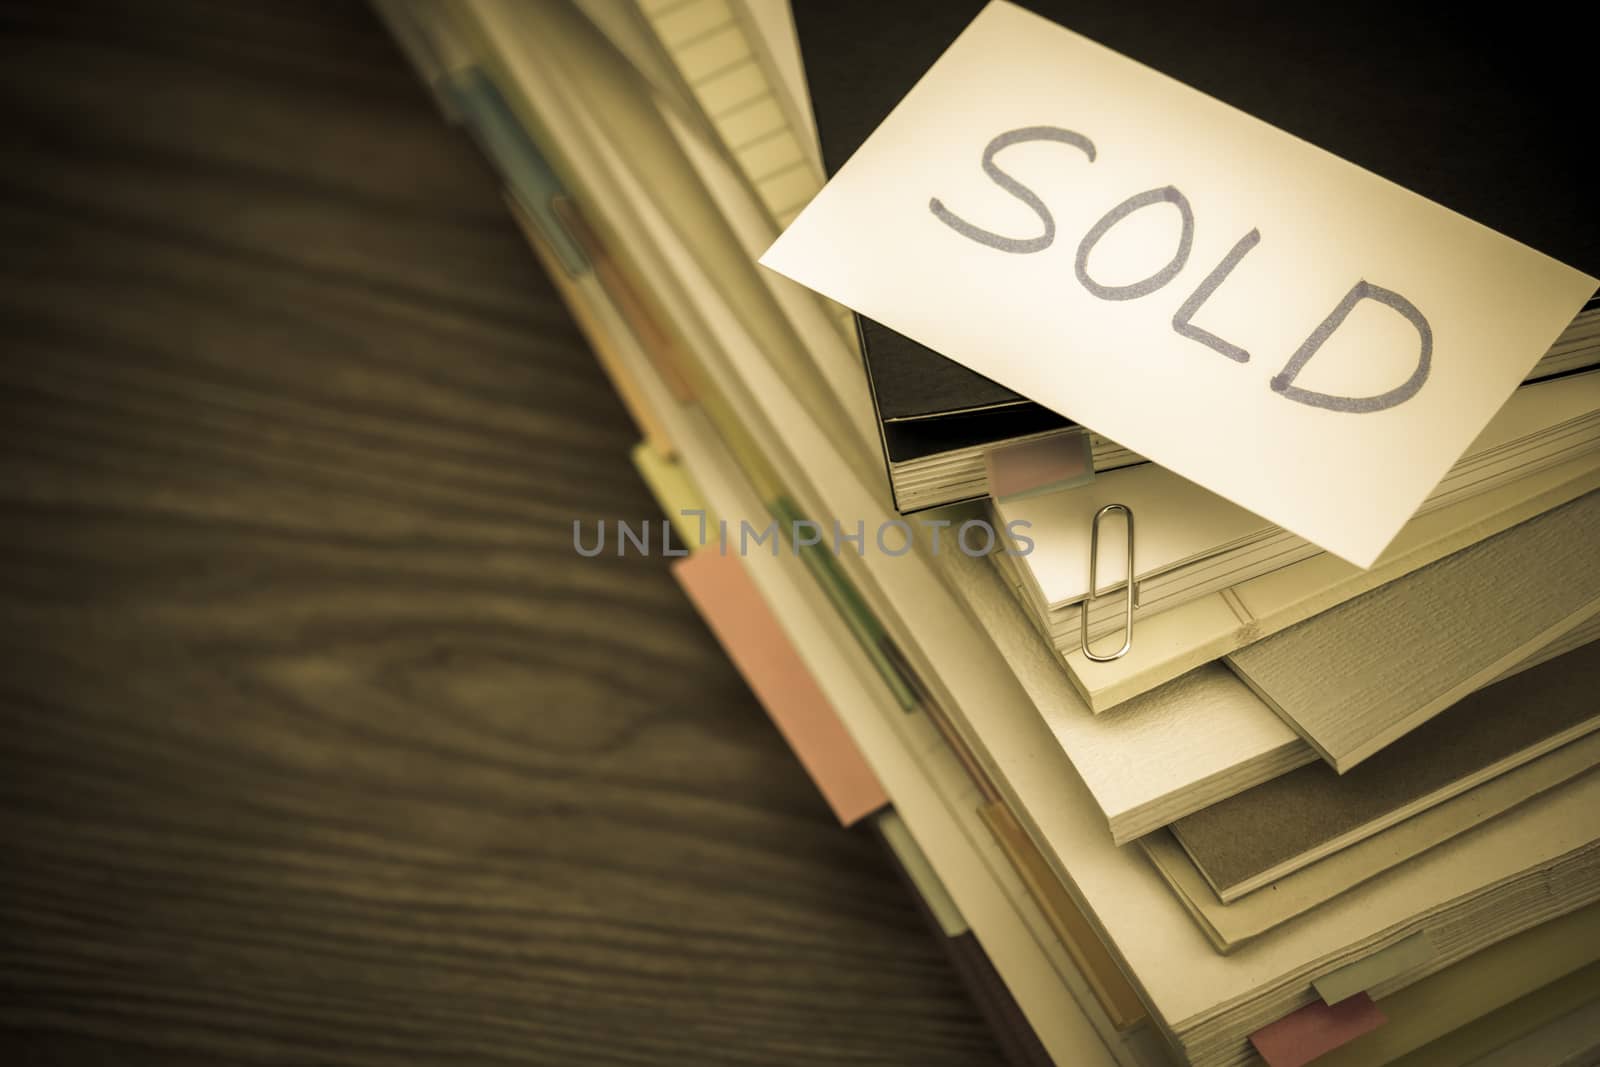 Sold; The Pile of Business Documents on the Desk